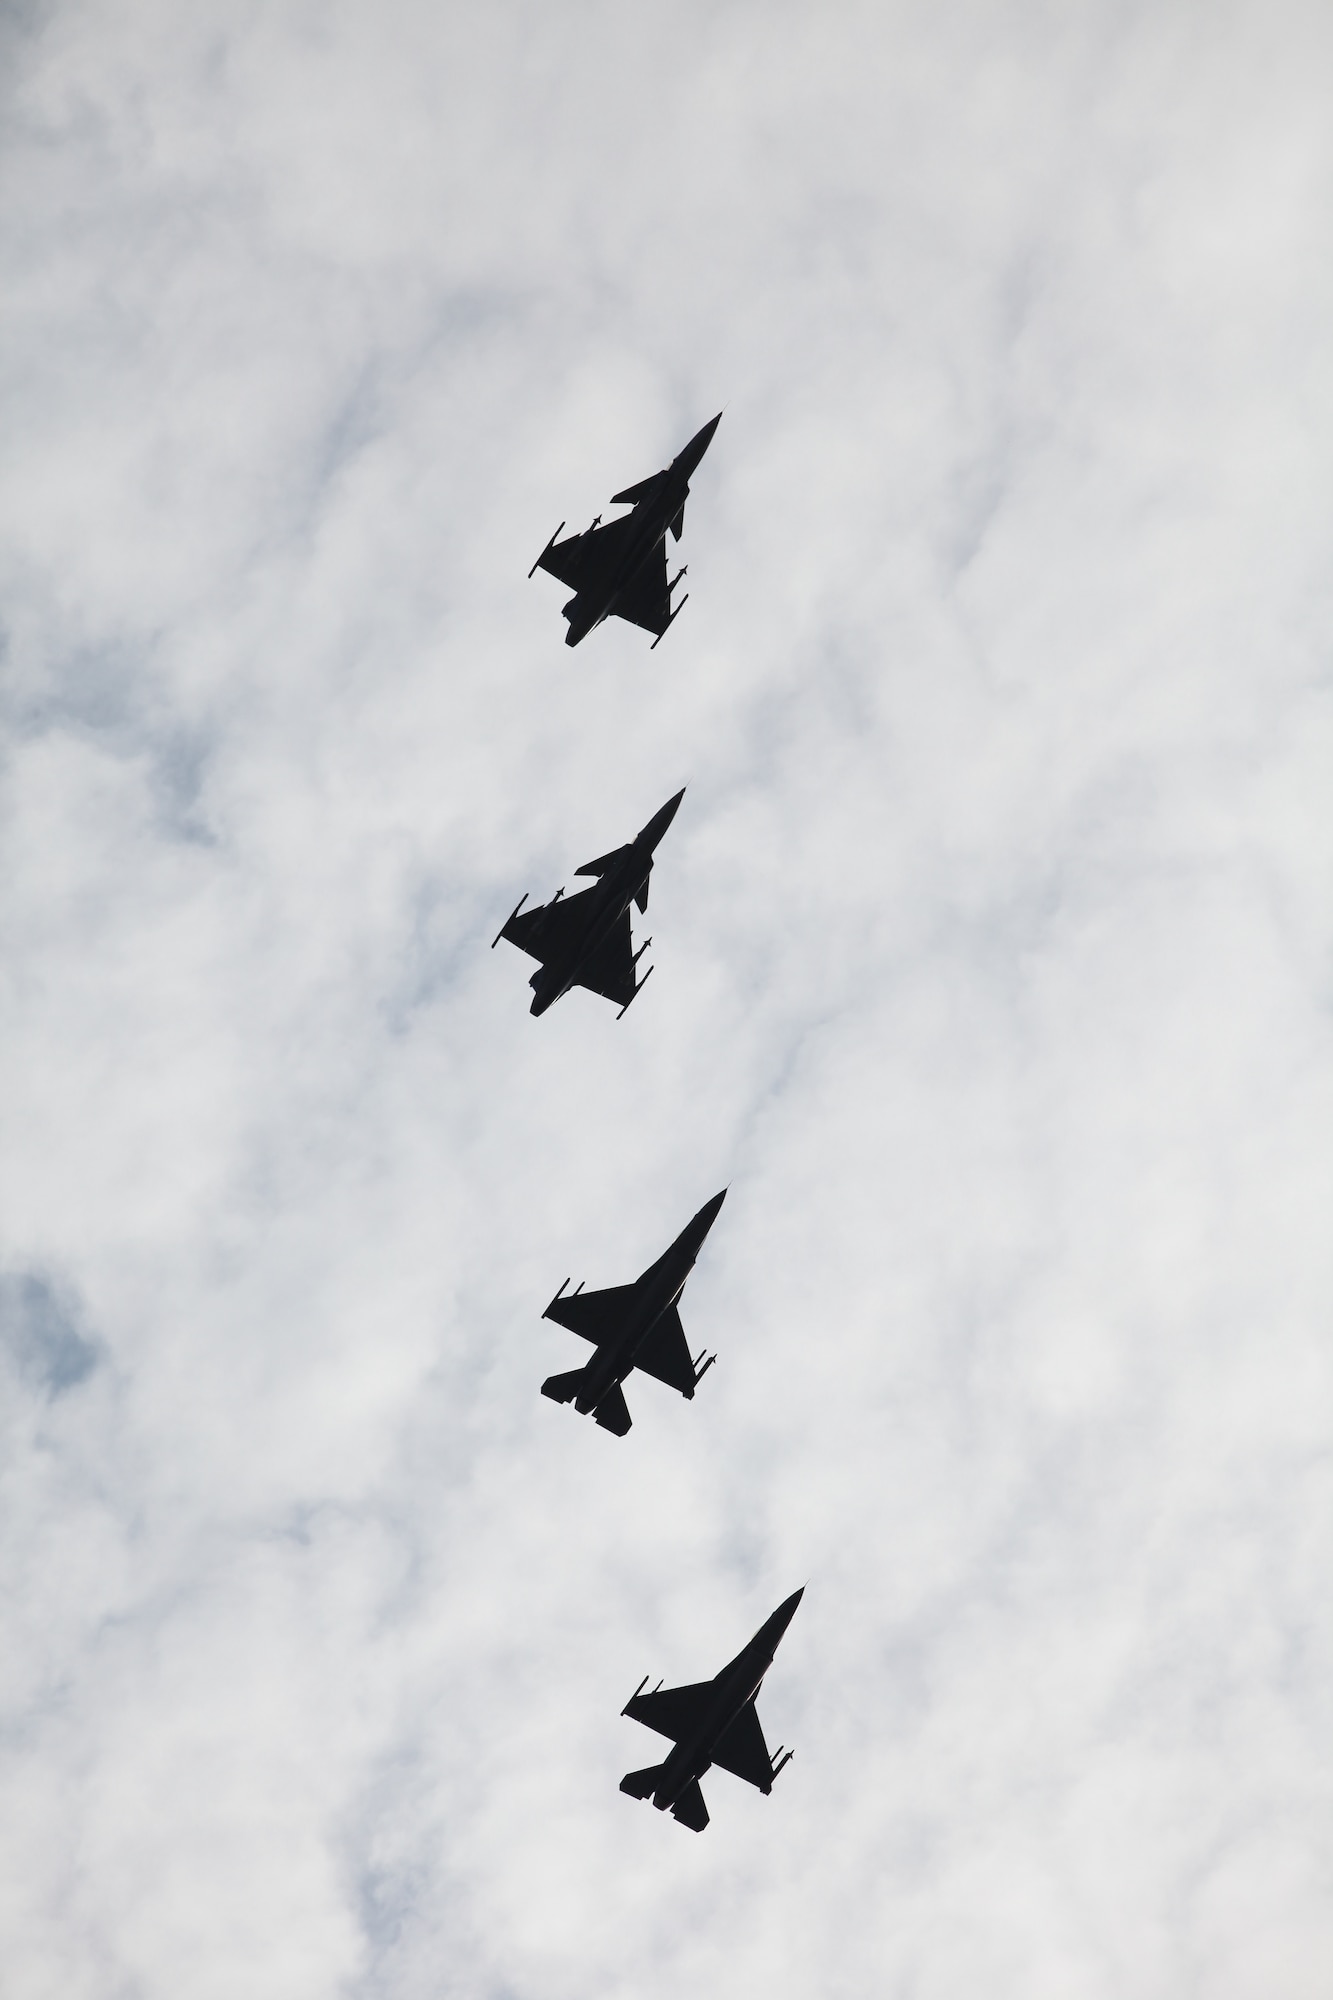 F-16s and Czech Grippens fly over Caslav Air Base.  Members of the Texas Air National Guard’s 149th Fighter Wing were in the Czech Republic conducting mutual training as part of the National Guard’s state partnership program.  (U.S. Air Force photo by Capt Randy Saldivar)